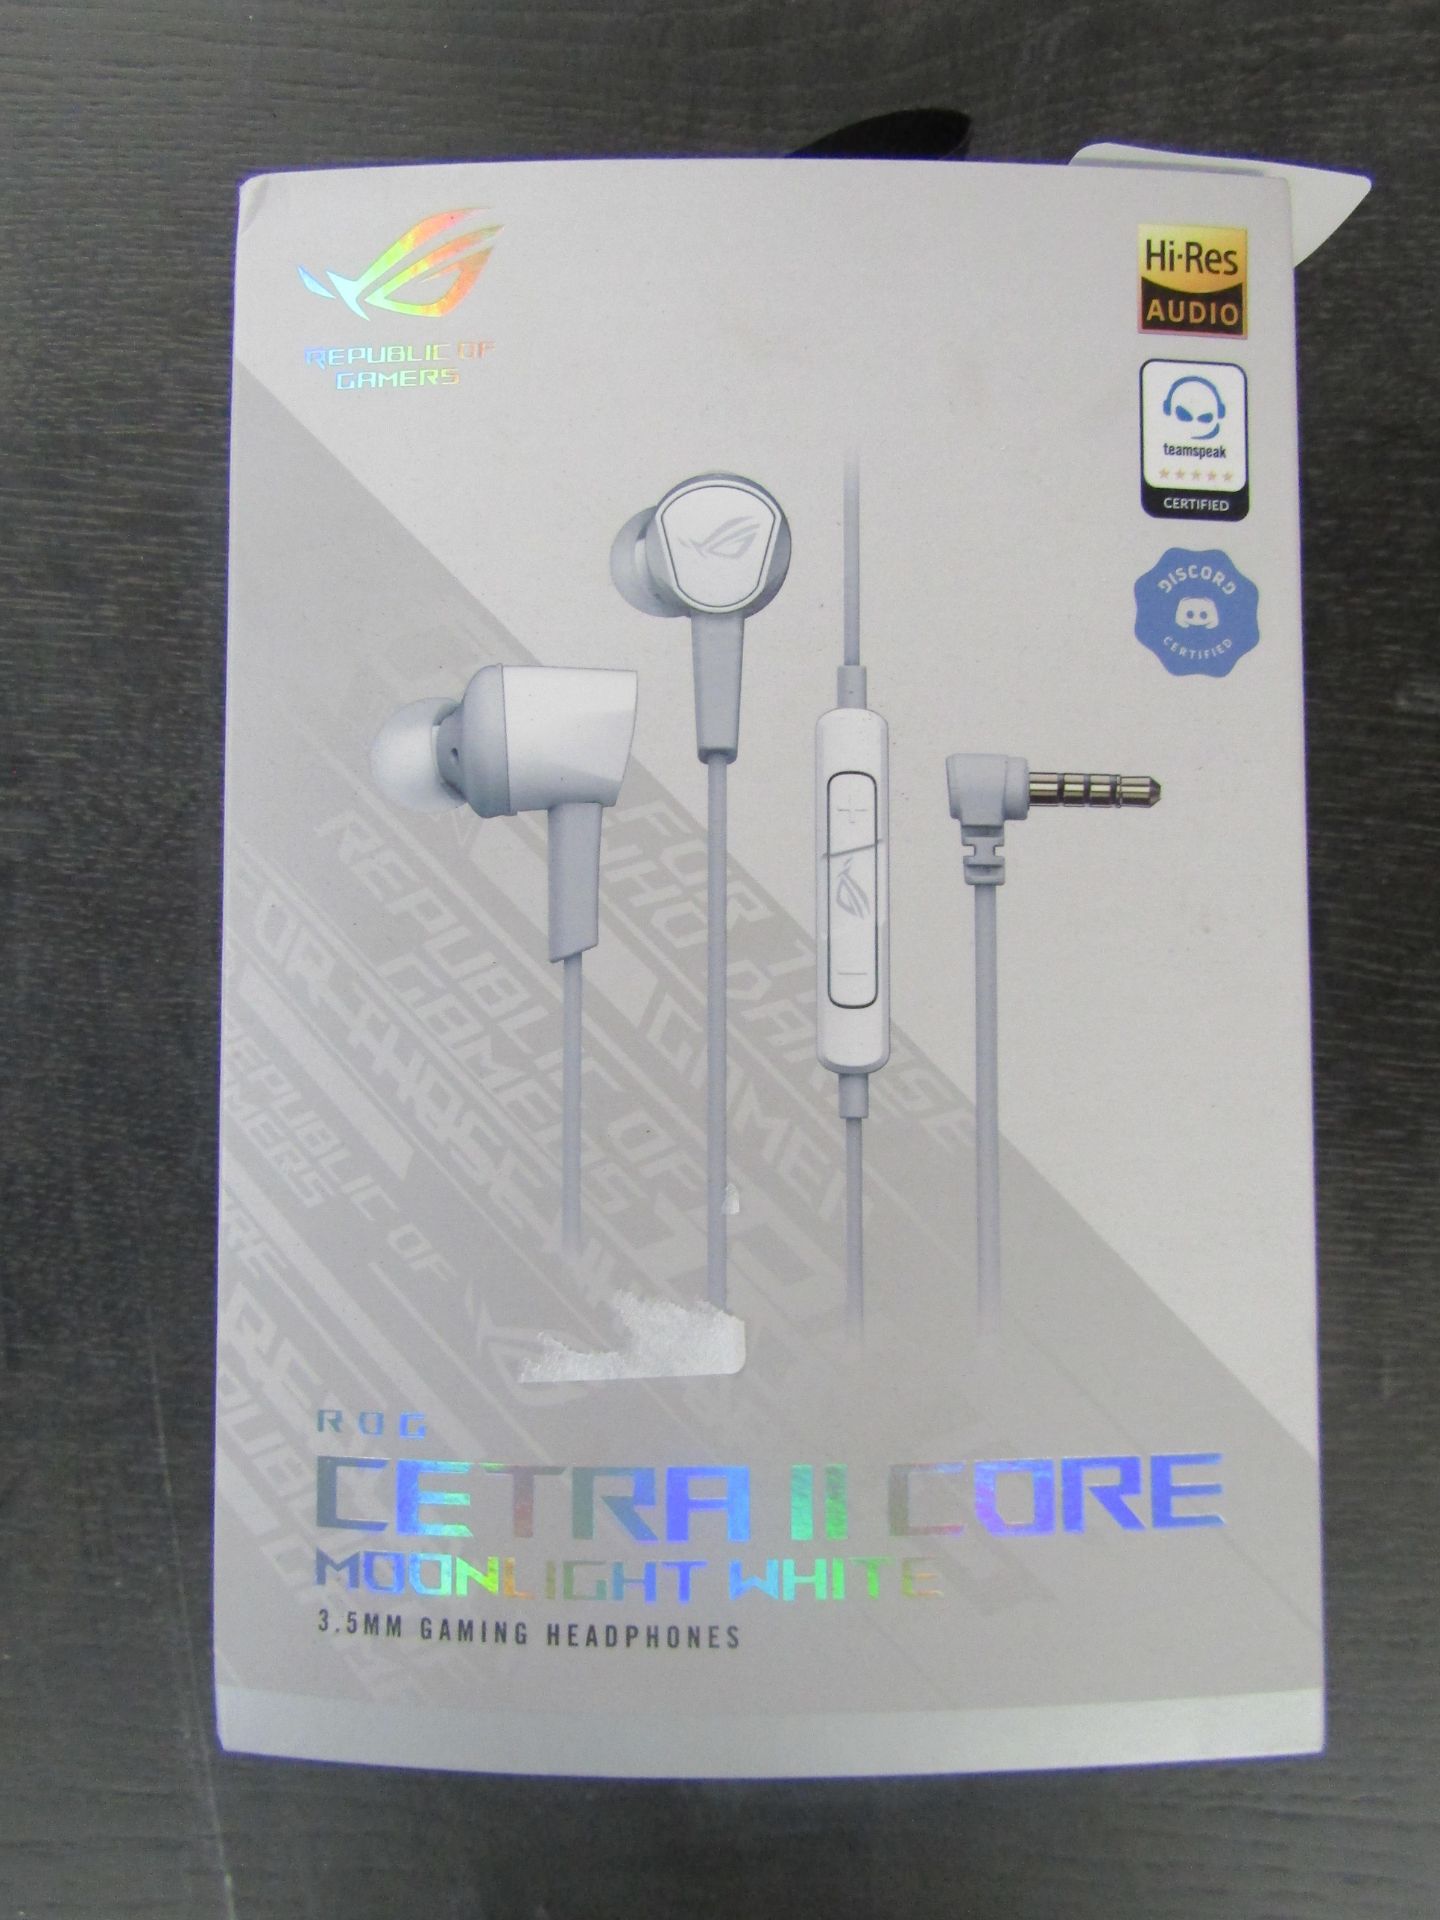 Republic Of Gamers Rog Centra II Core 3.5mm Gaming Headphones, Moonlight White - Unchecked & Boxed